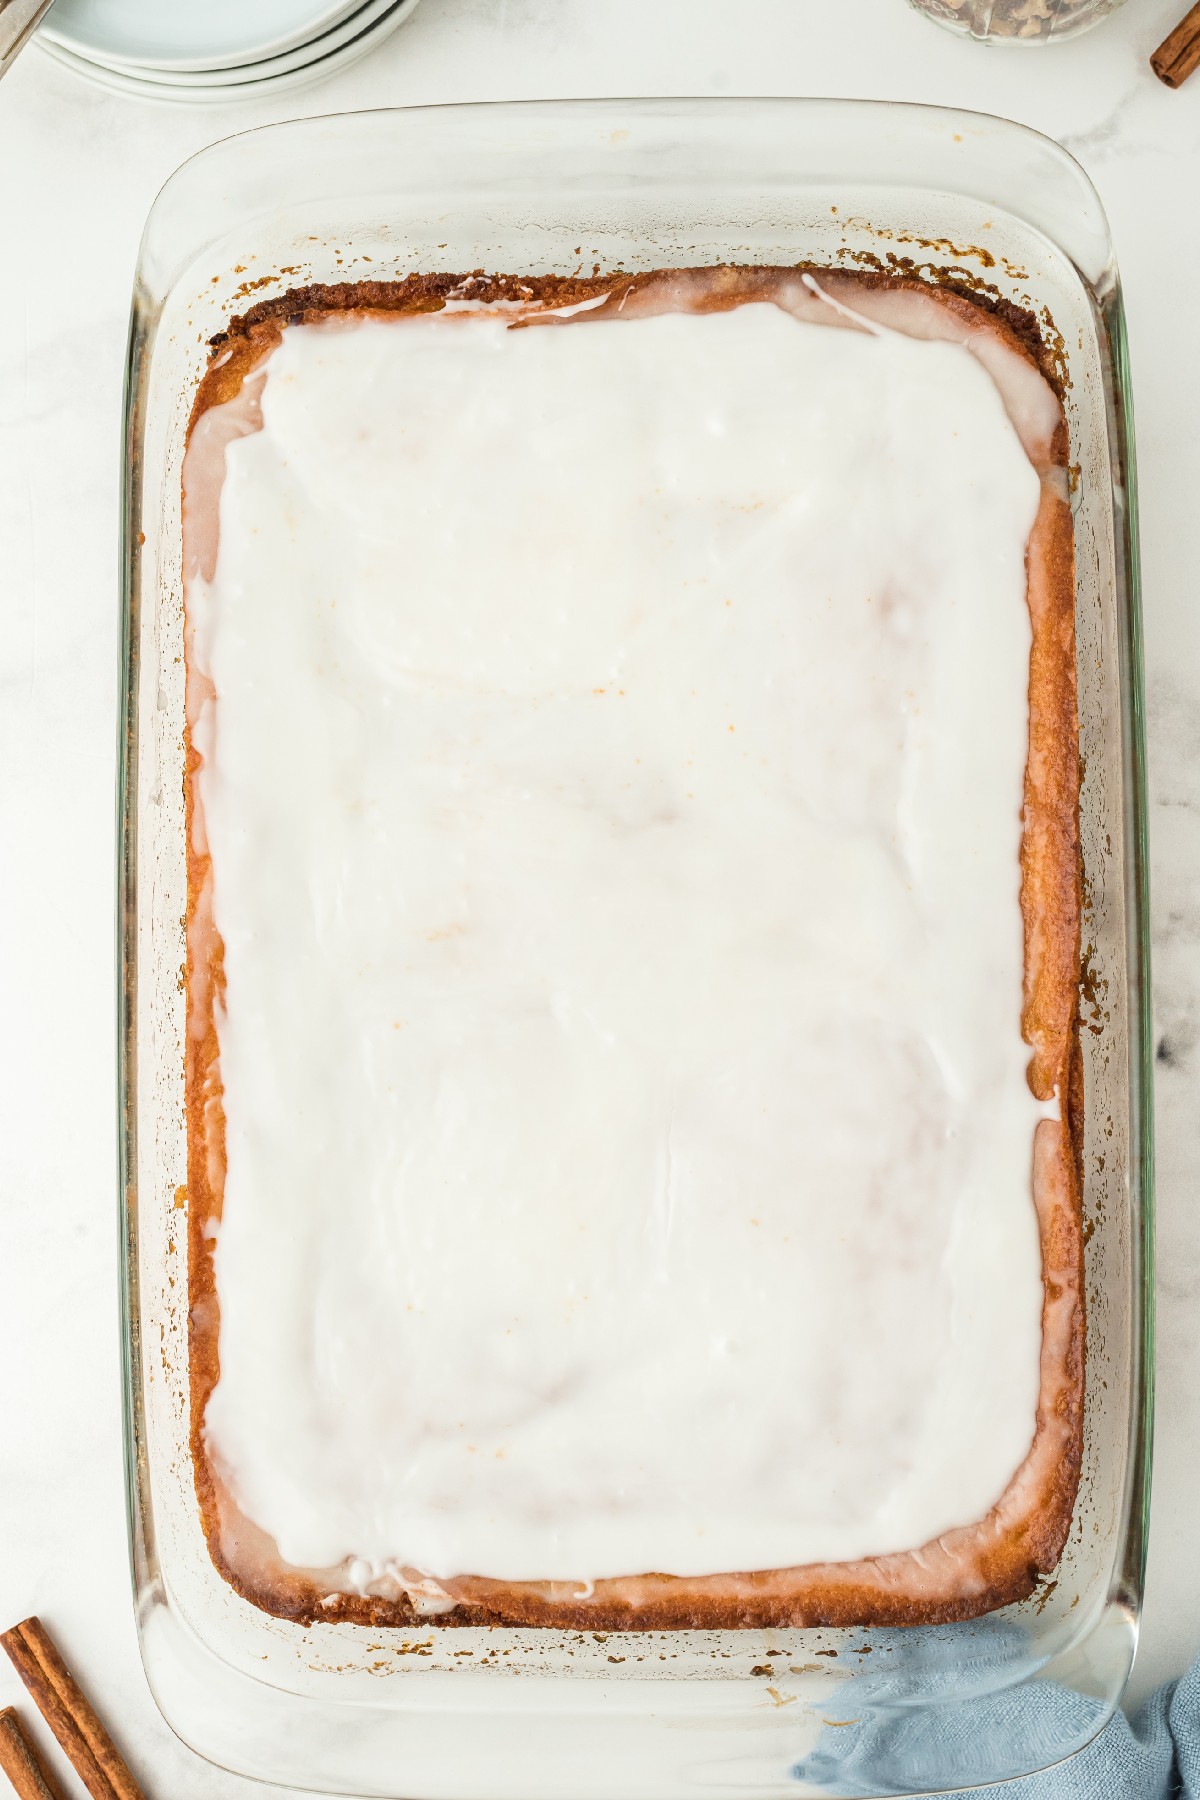 Baked Honey Bun Cake with frosting.